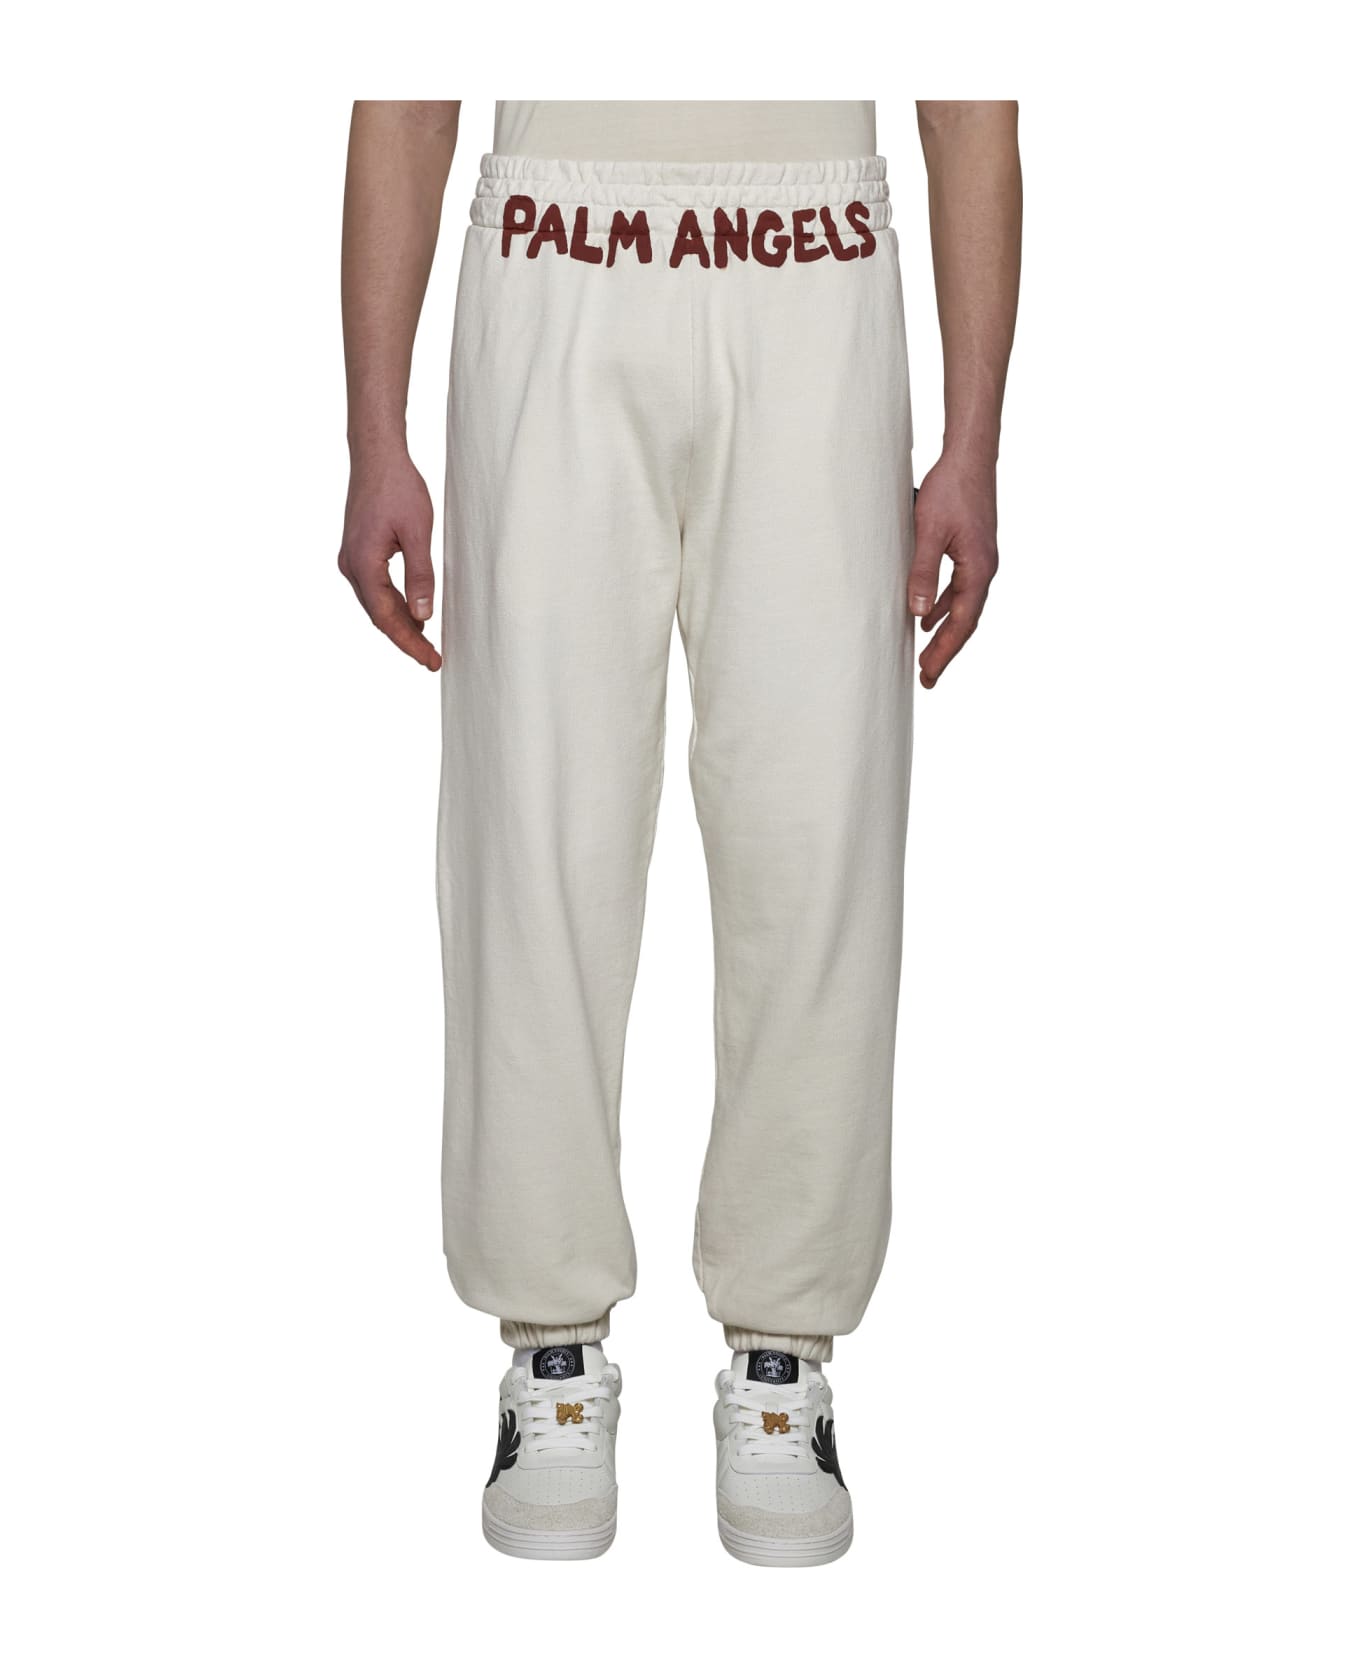 Palm Angels Pants - Off white red スウェットパンツ